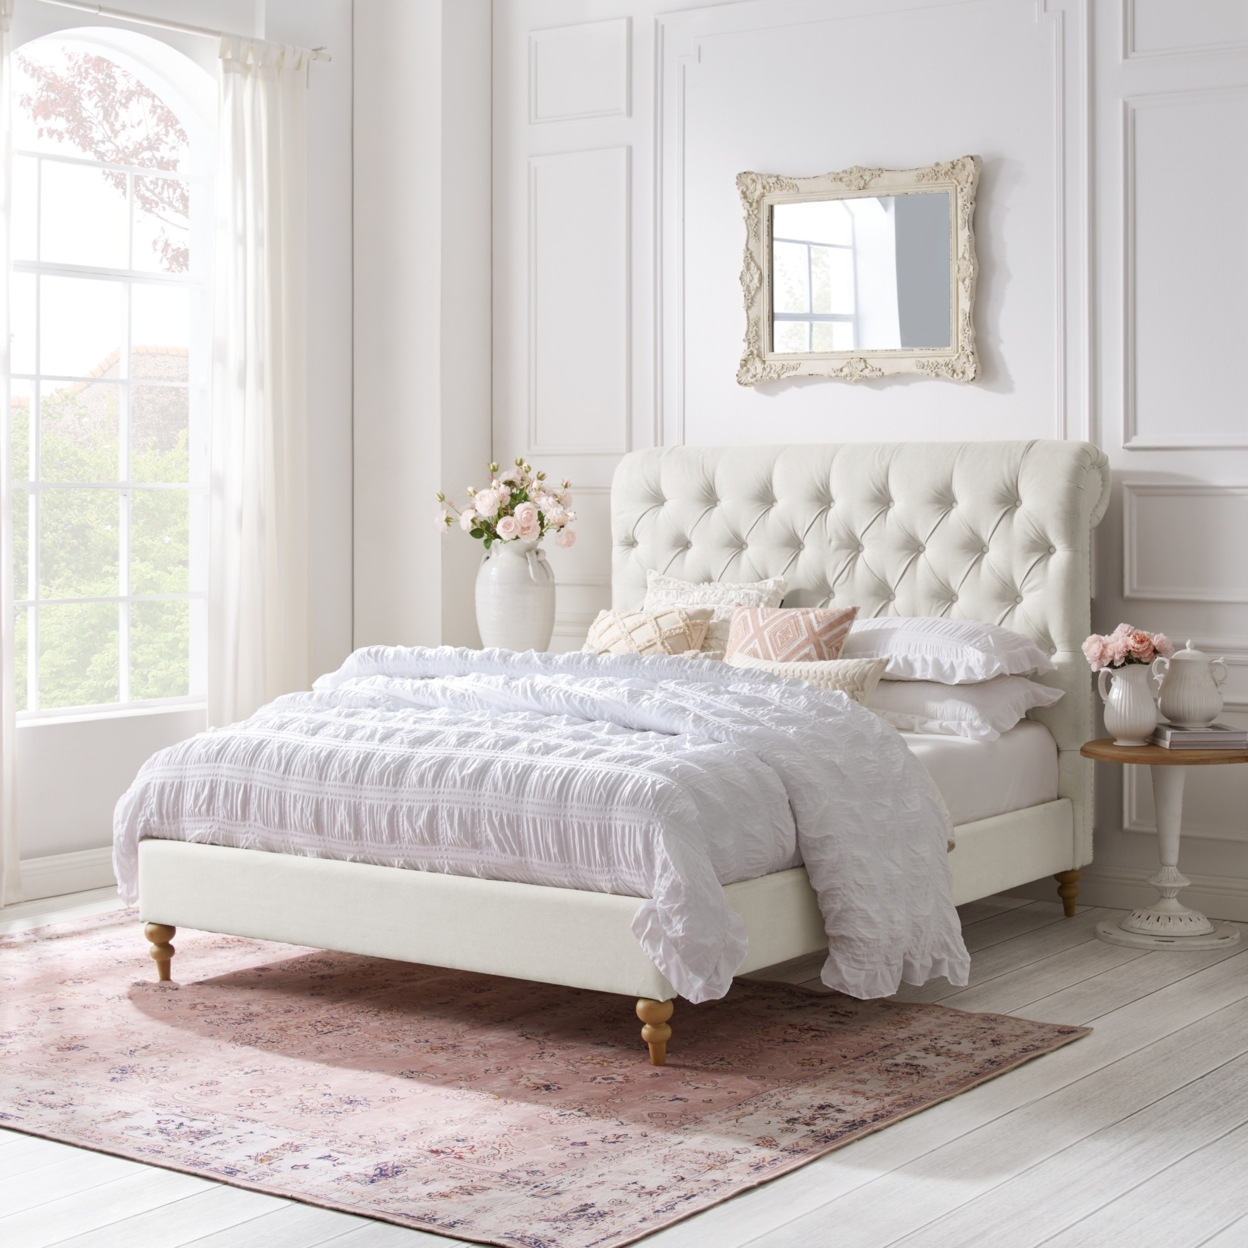 Kailynn Bed-Rolled Top Button Tufted-Nailhead Trim-Slats Included - Cream White, King